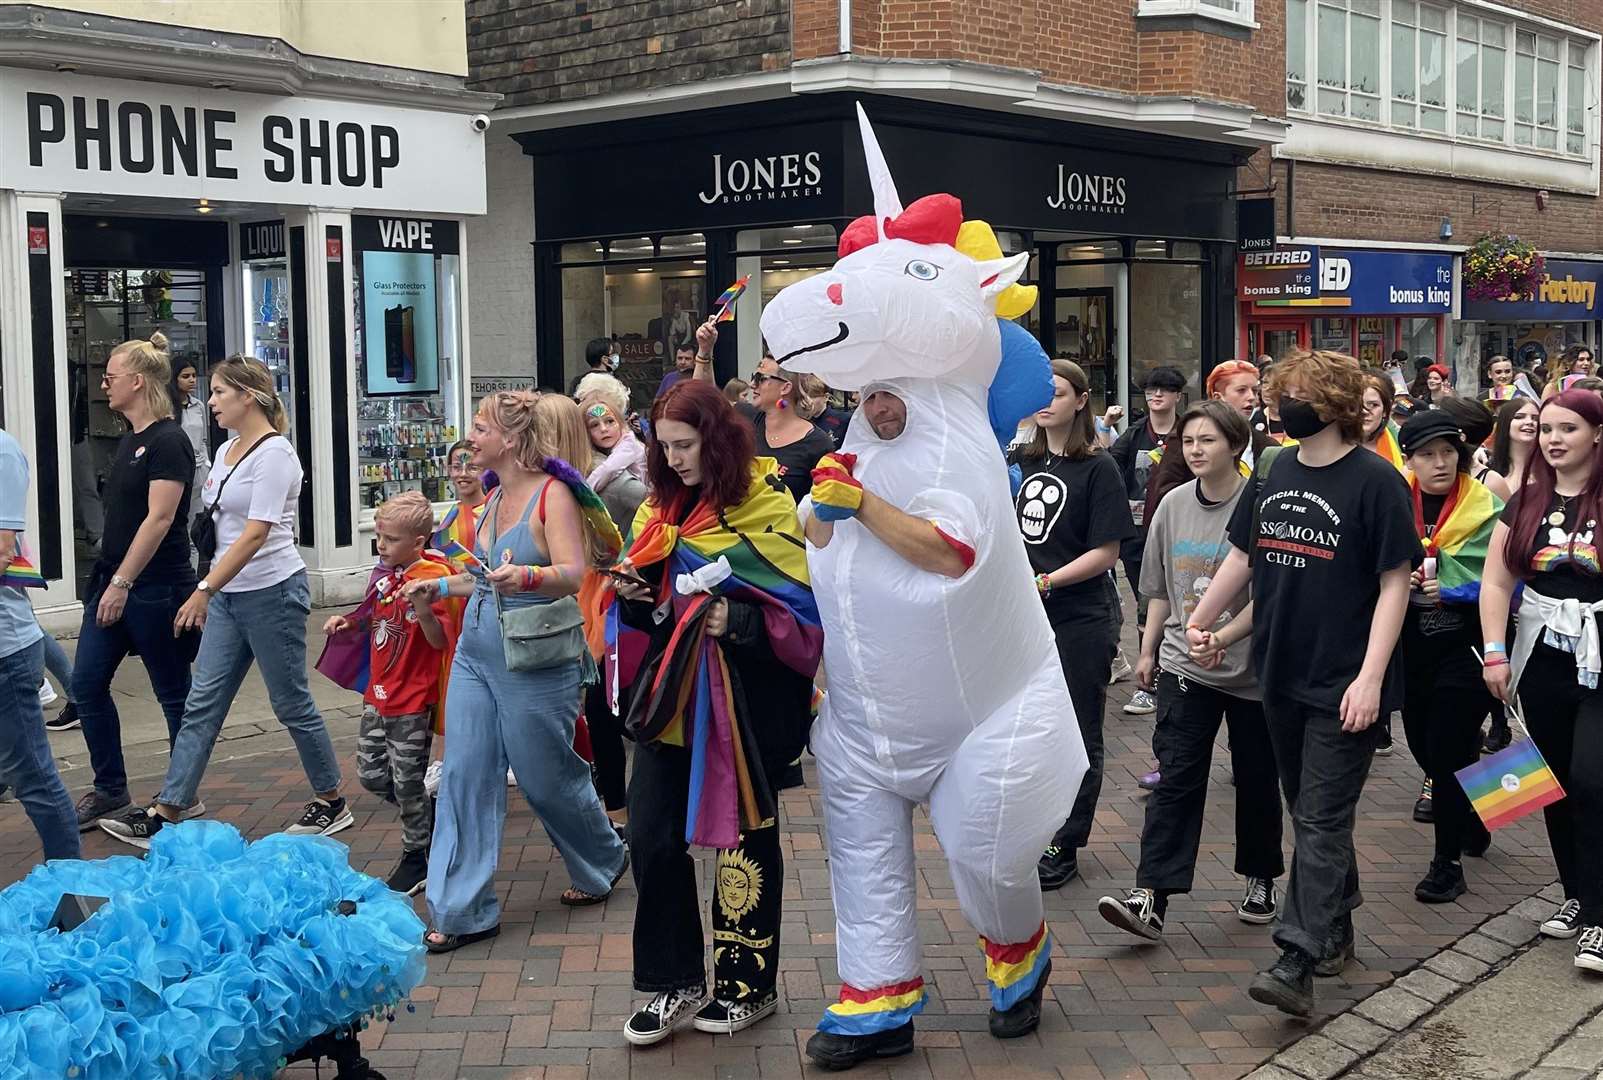 The festival will kick off with a Pride Parade through the High Street